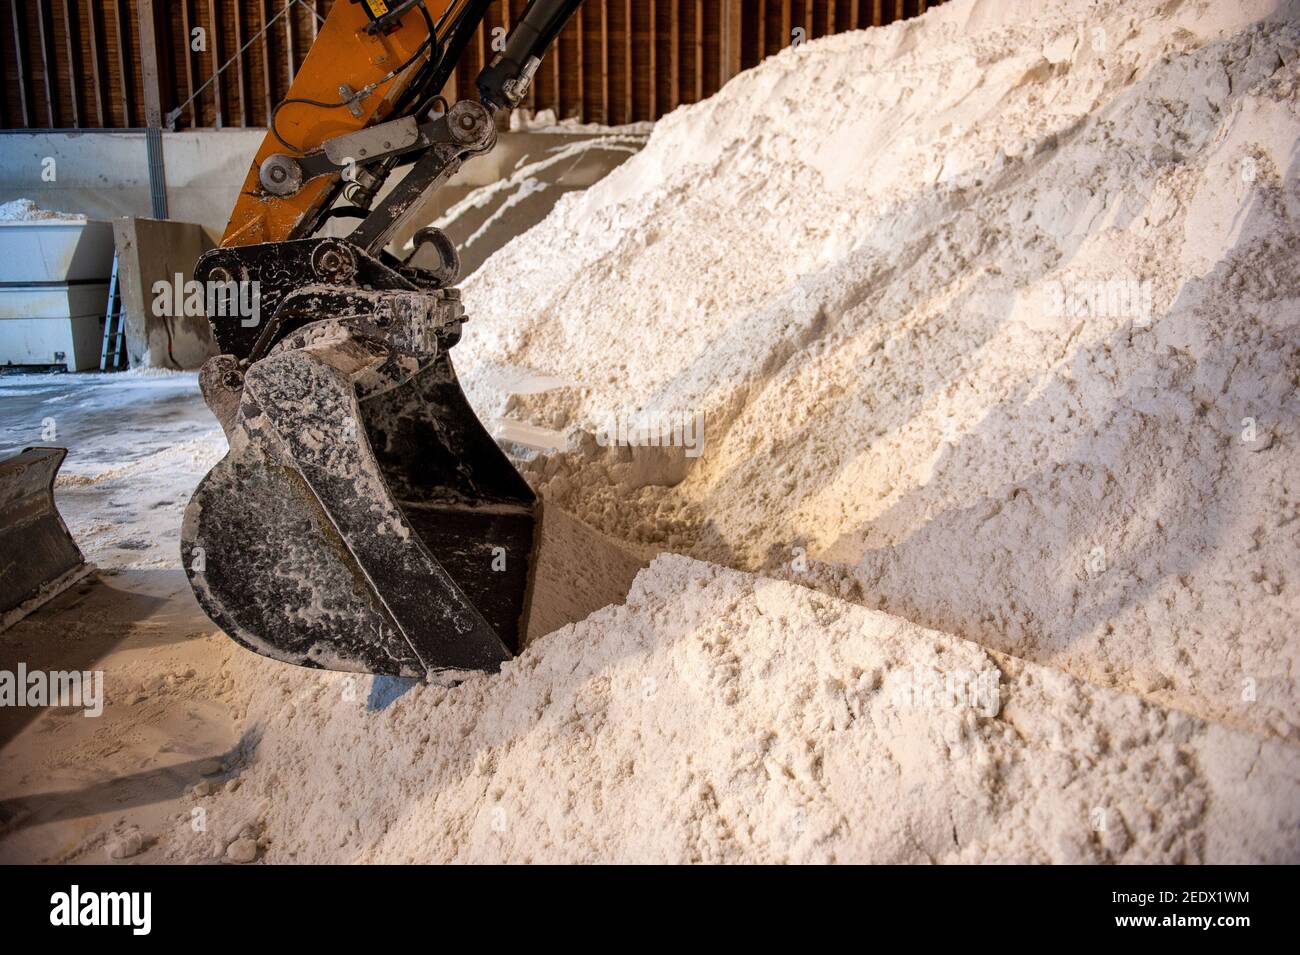 Salt in a salt storage used for anti skidding on a road. Stock Photo